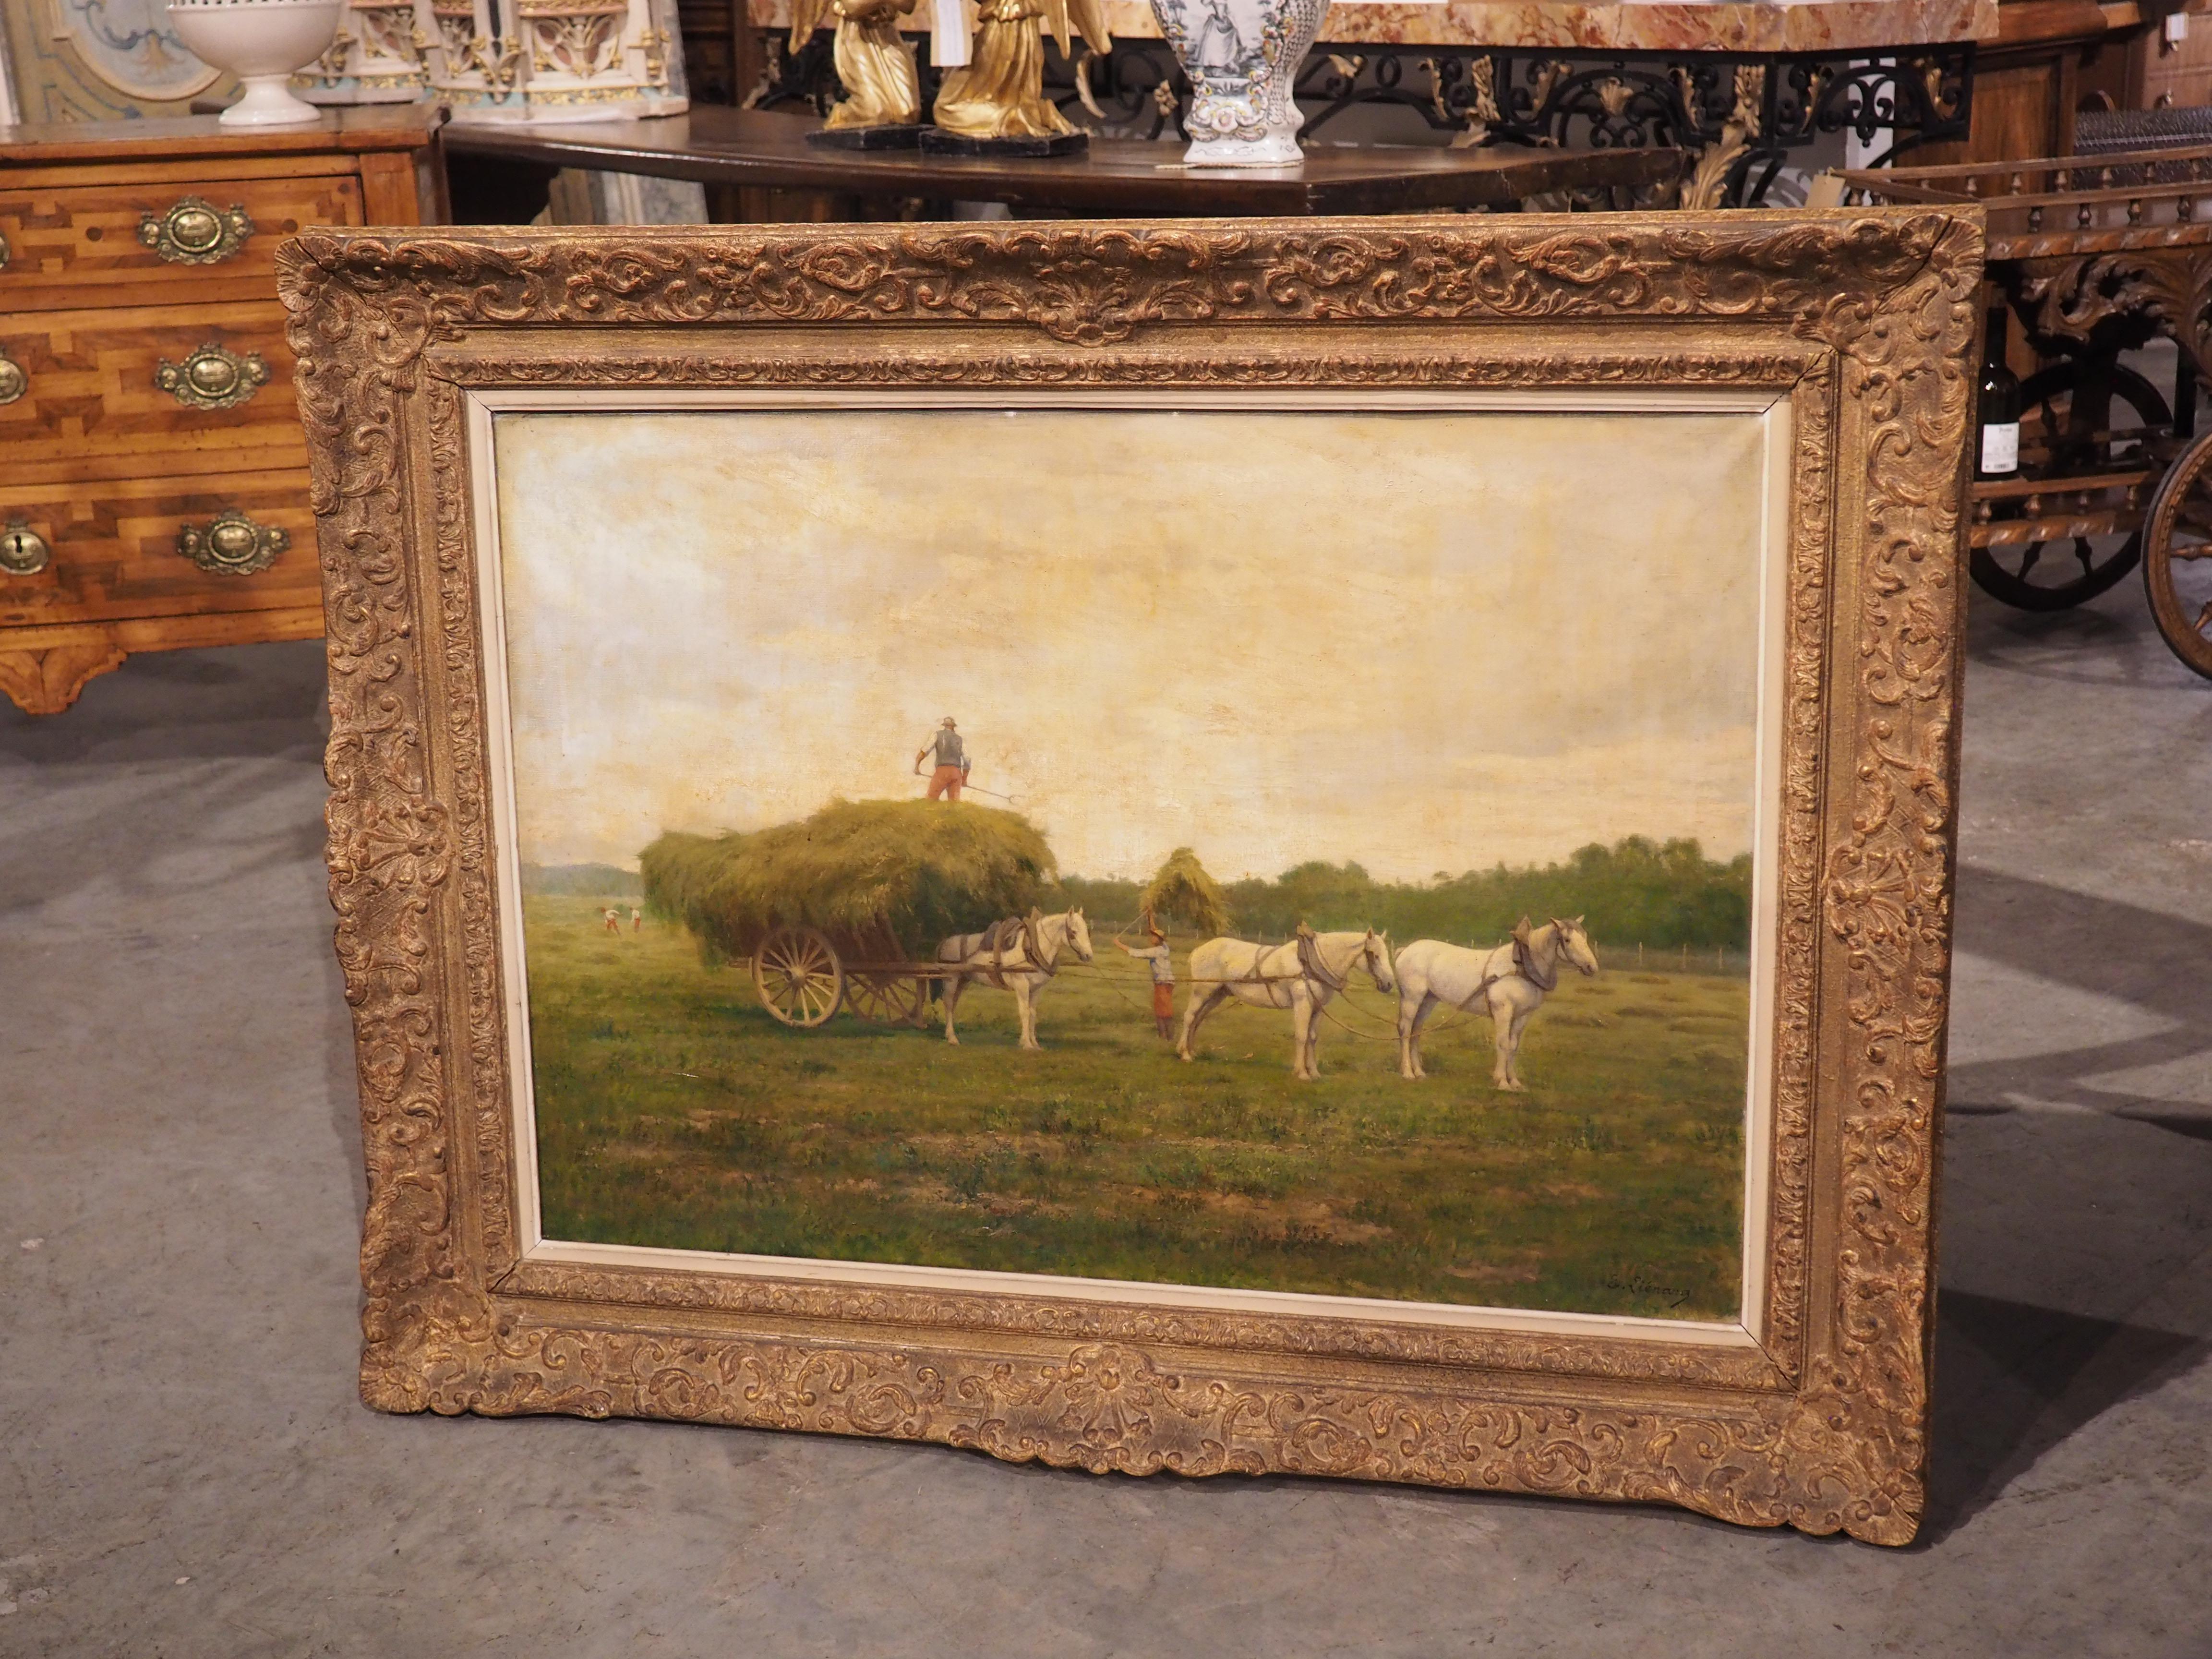 Presented in a foliate-themed giltwood frame, this oil painting captures the essence of a French farm in the 1800s. A lush green landscape beneath a sky filled with fluffy white clouds serves as the perfect backdrop for the focal point of the piece.